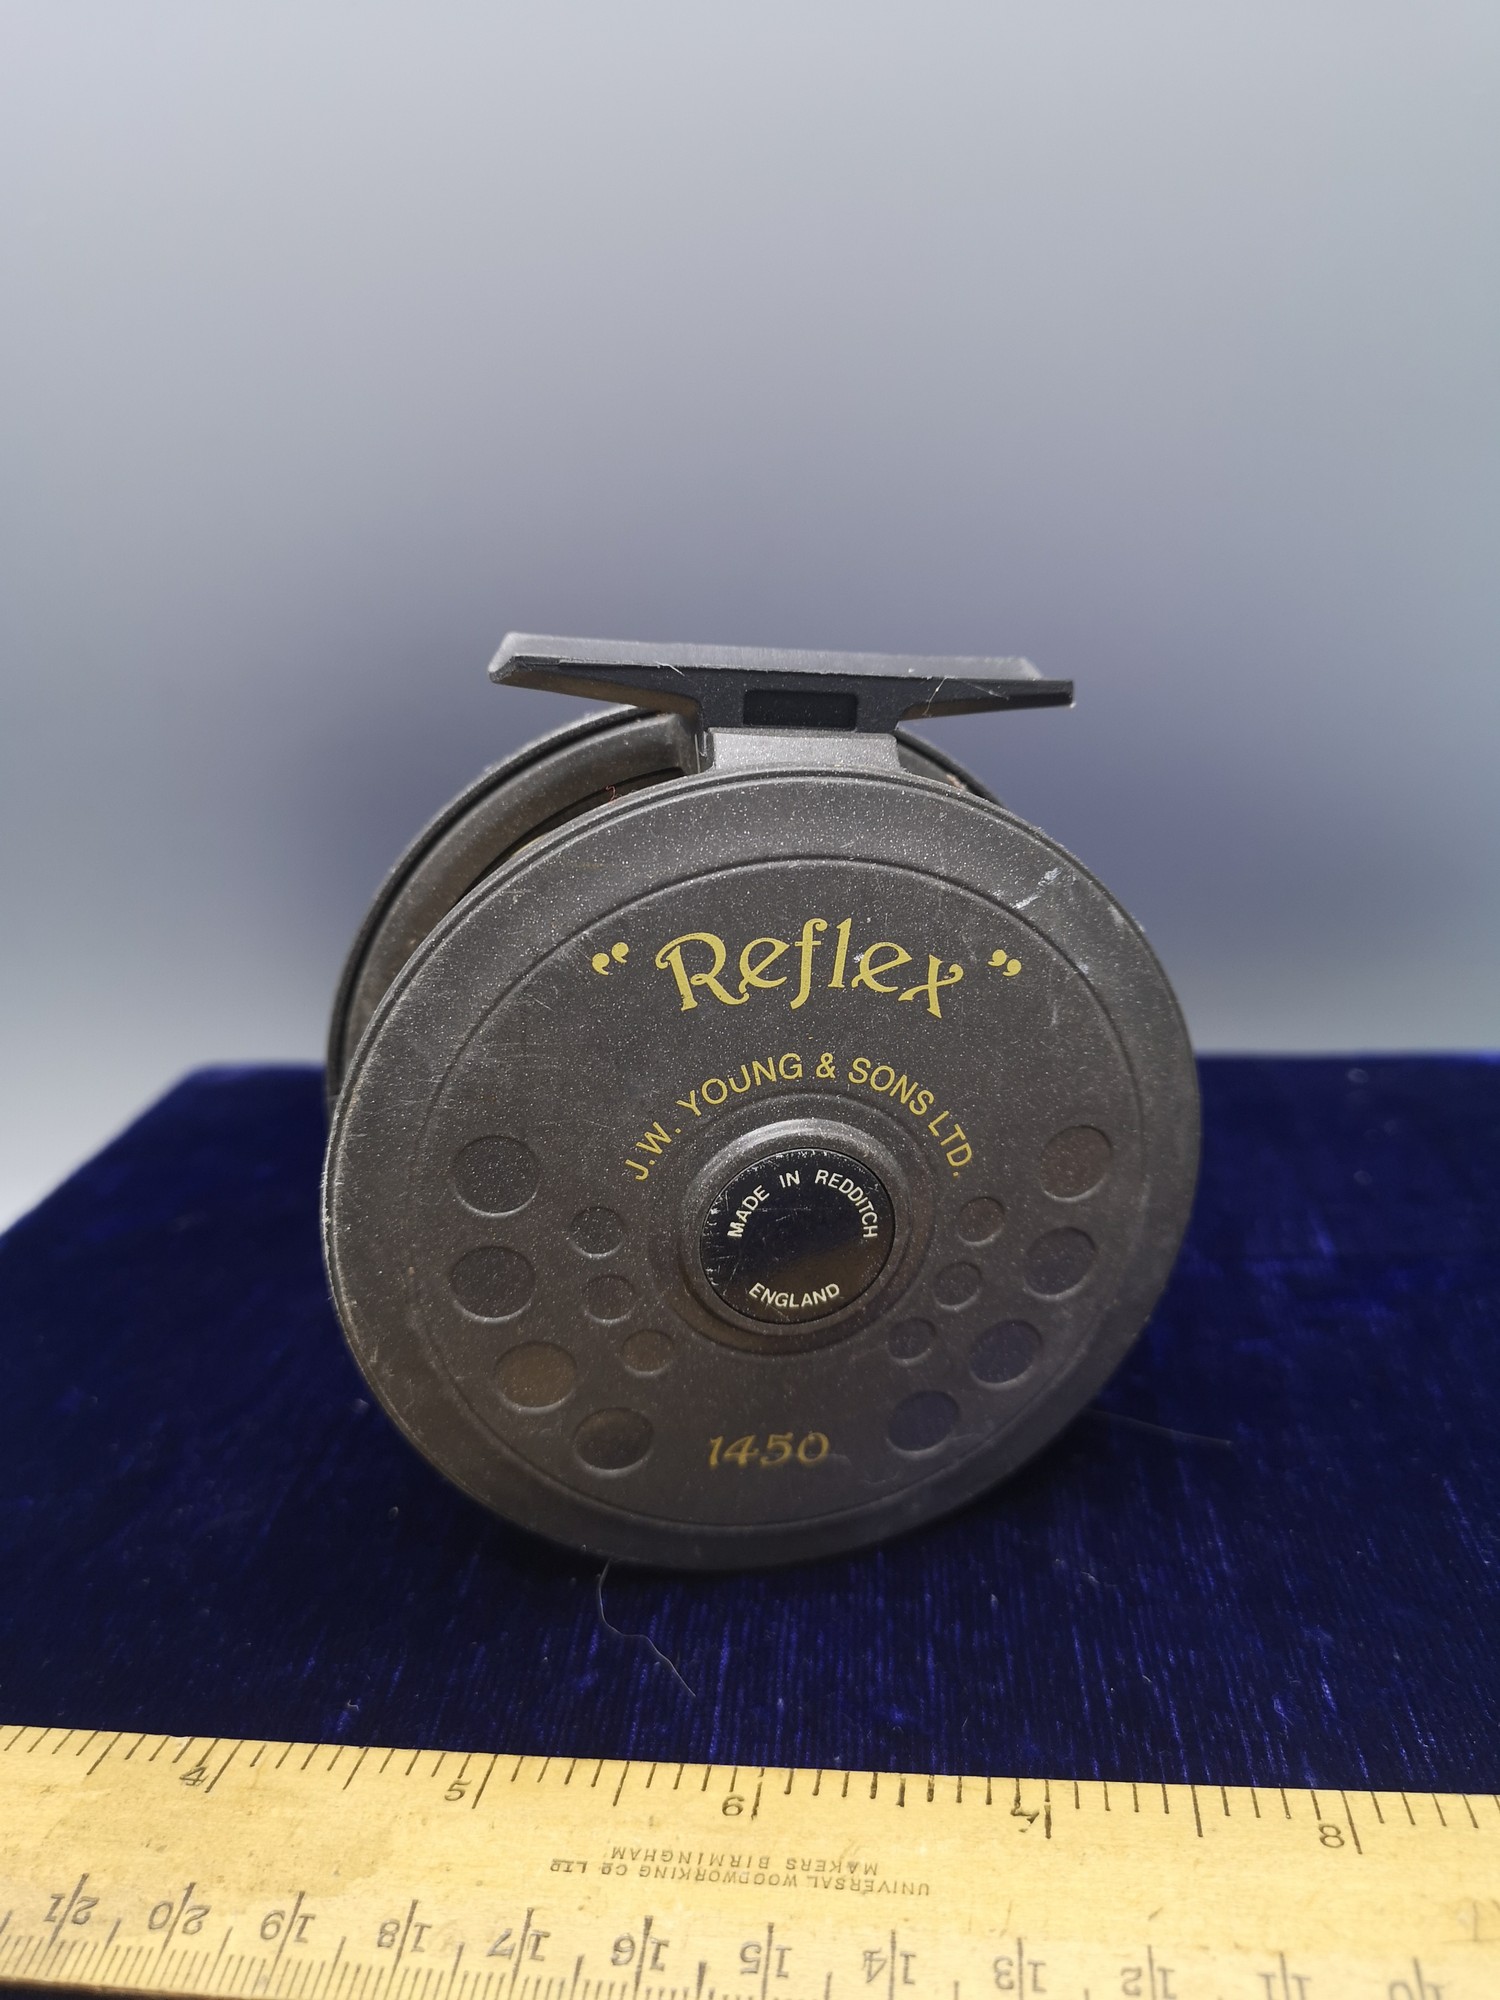 JW young and sons limited reflex fly reel.